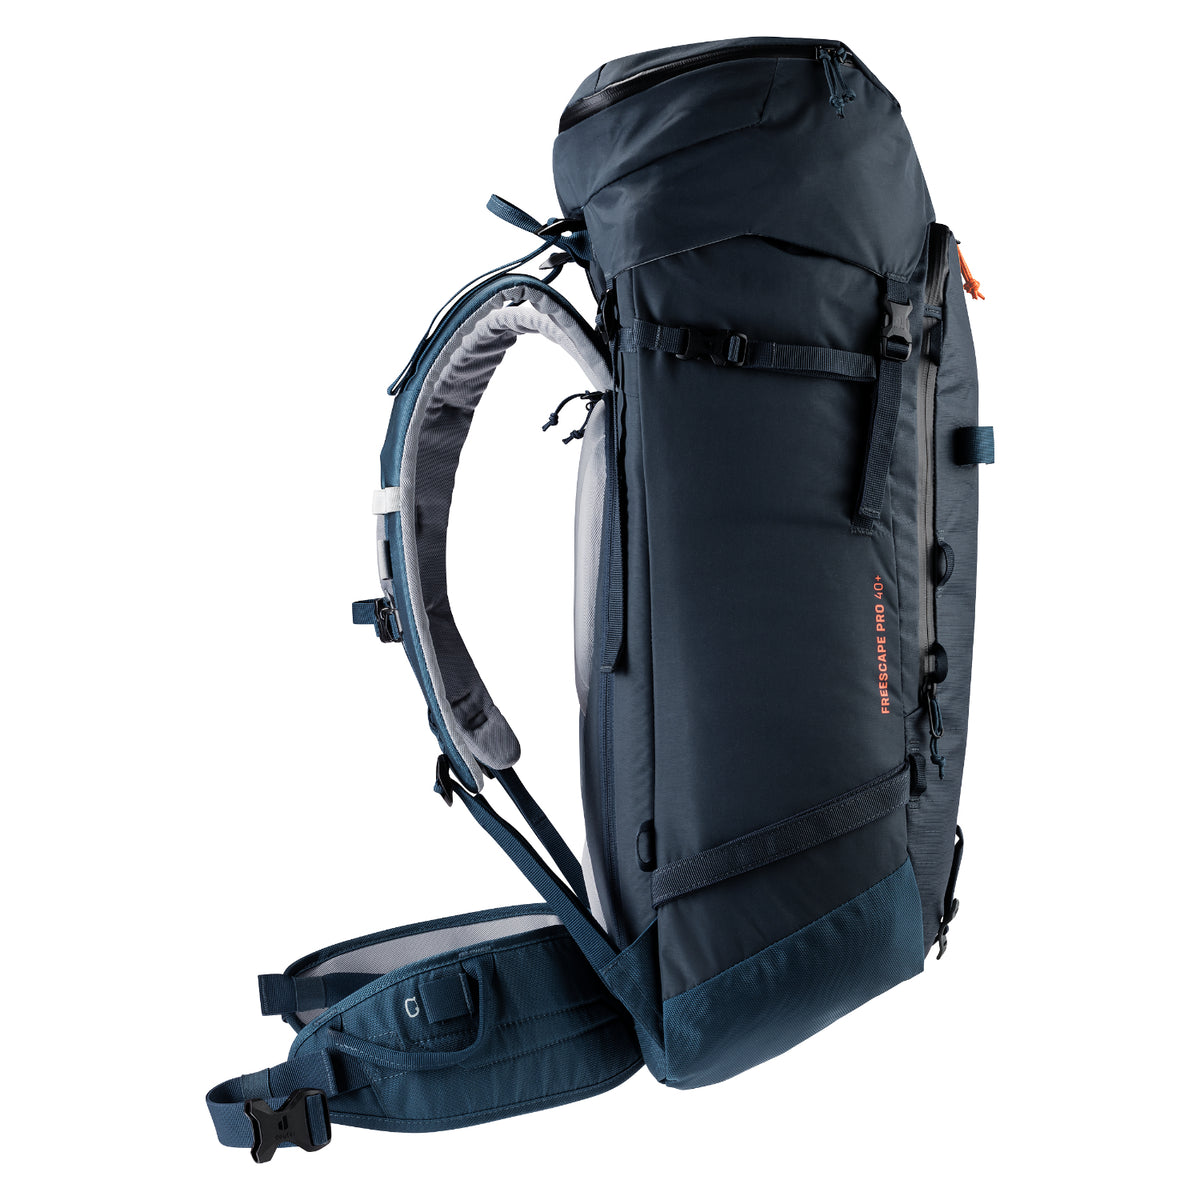 Deuter Freescape Pro 40+ rucksack in ink blue, from the side.